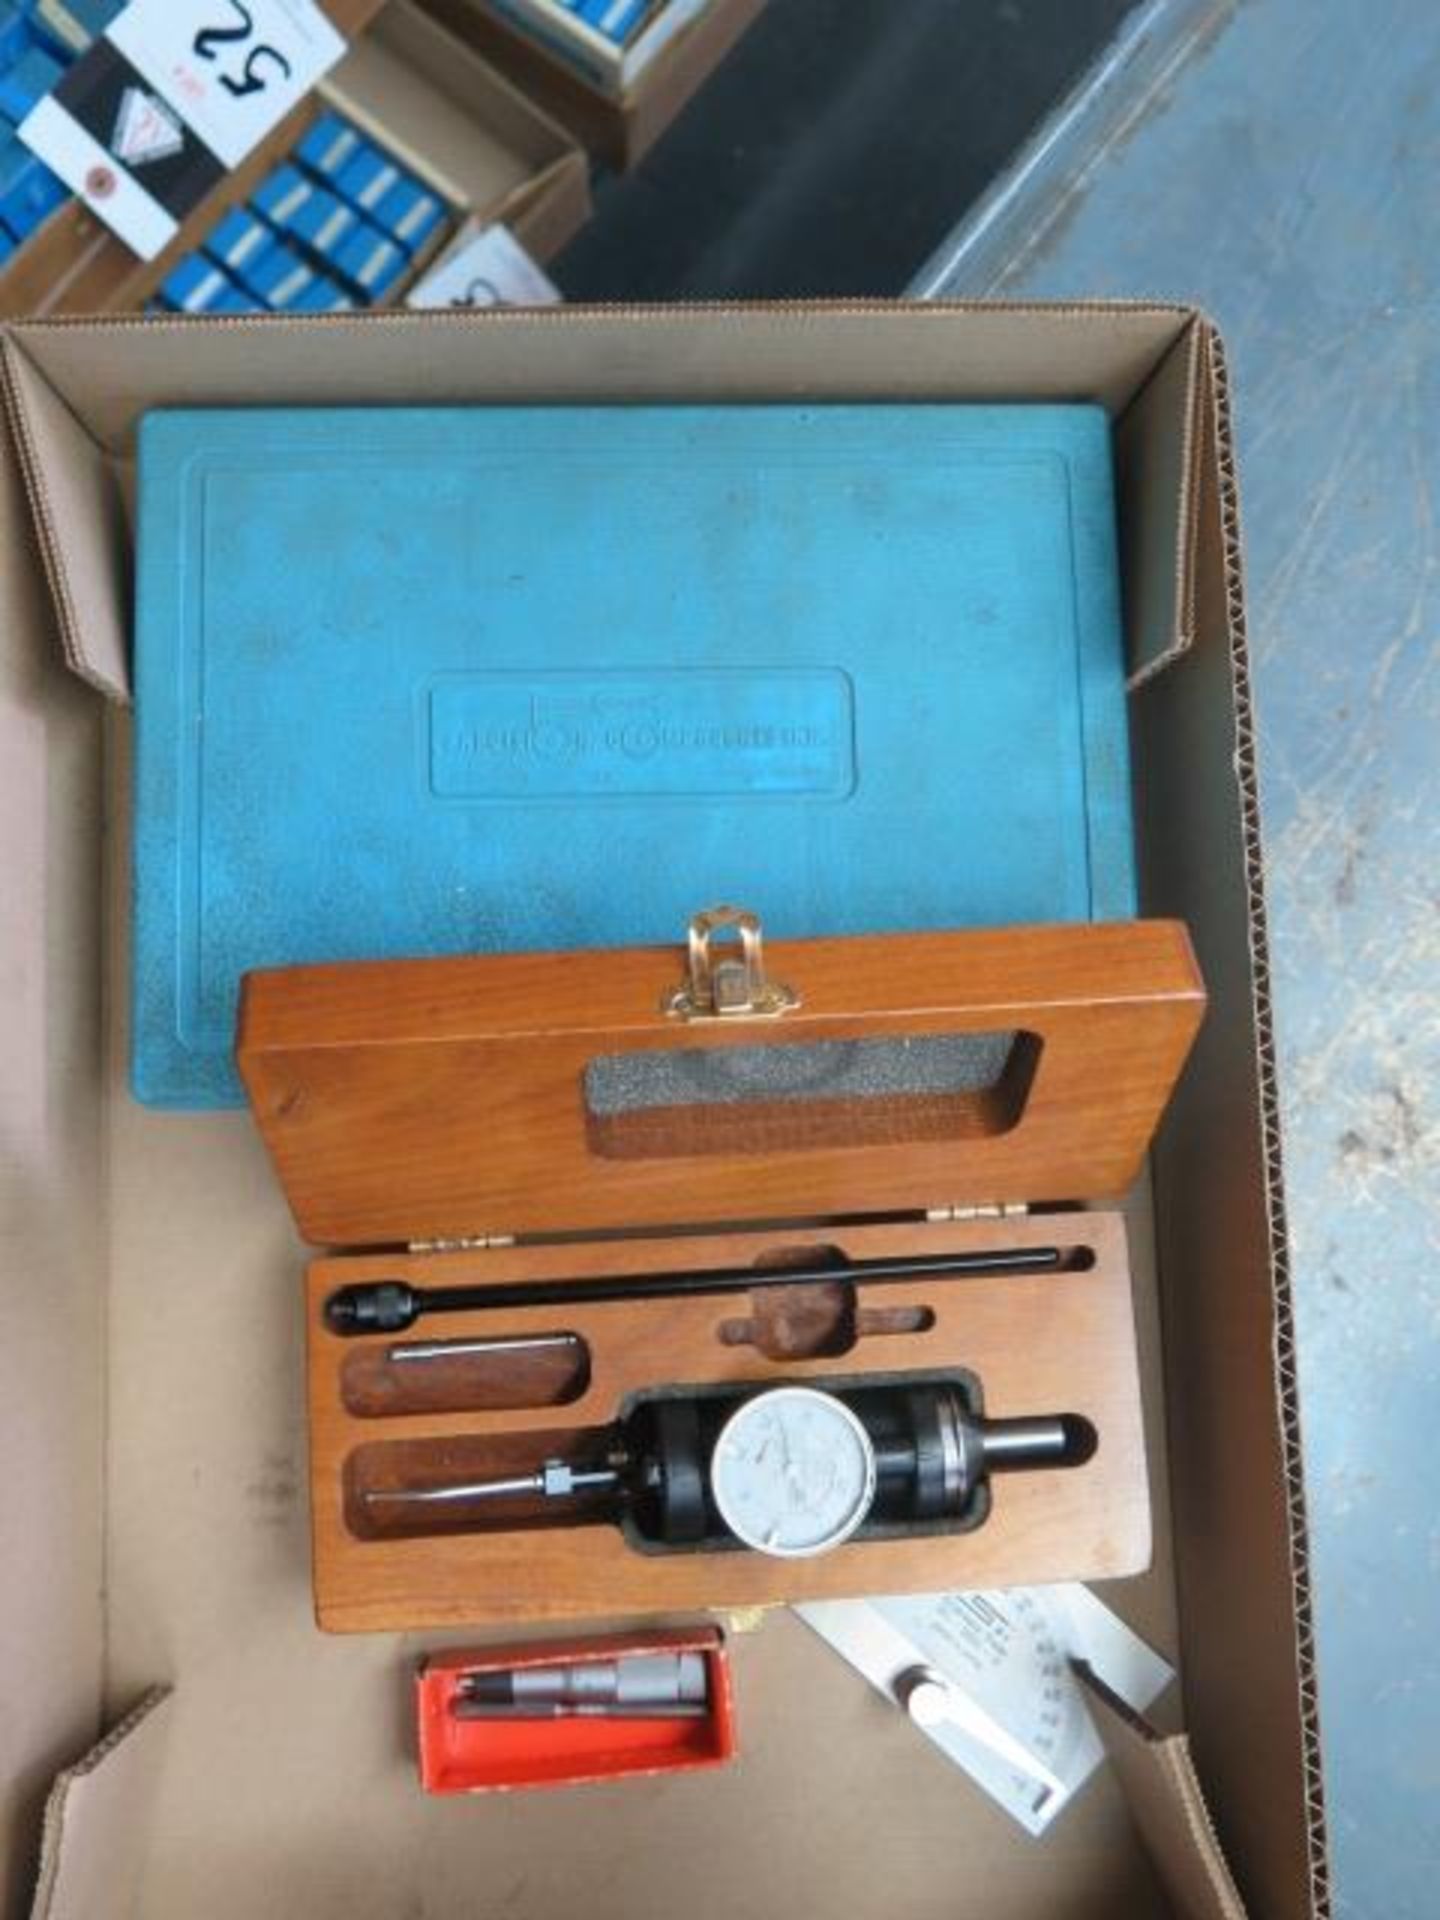 Blake Universal Indicator, Mitutoyo .5" Mic Head and Gage Ball Set (SOLD AS-IS - NO WARRANTY) - Image 2 of 4